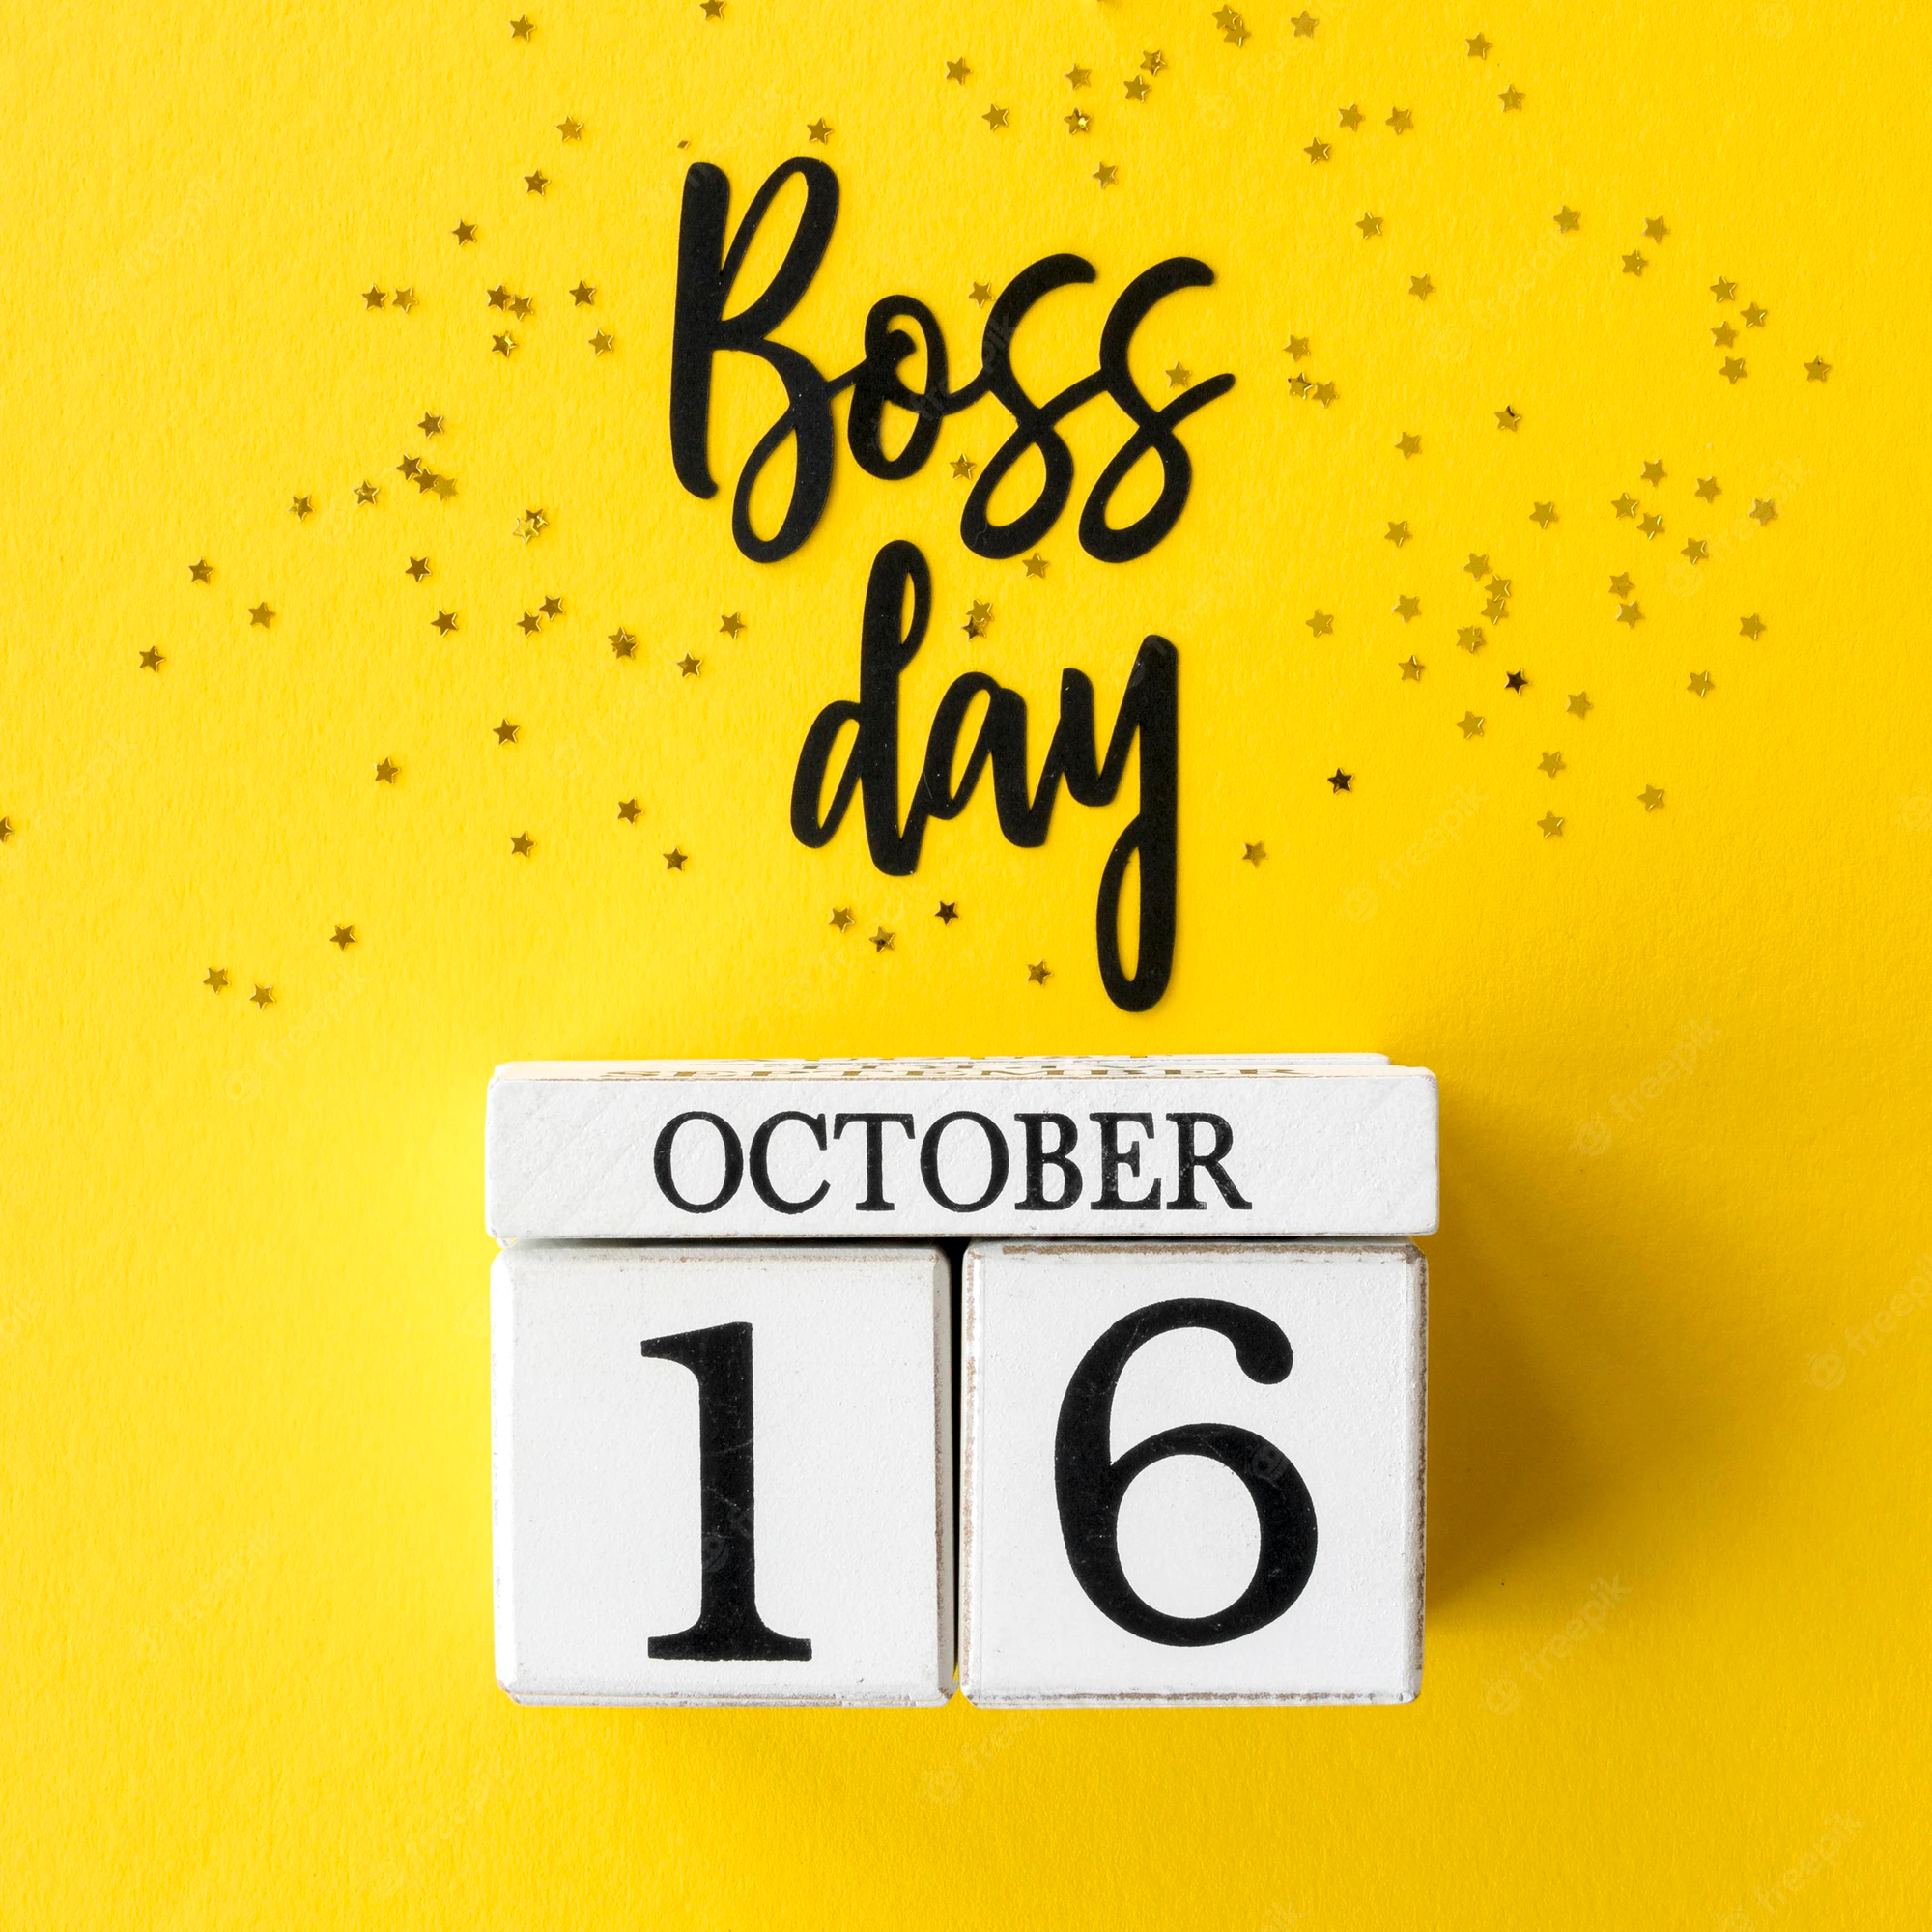 Happy Boss Day 2022: Best Wishes, Quotes, Images, Messages, Greetings, Posters, and Slogans